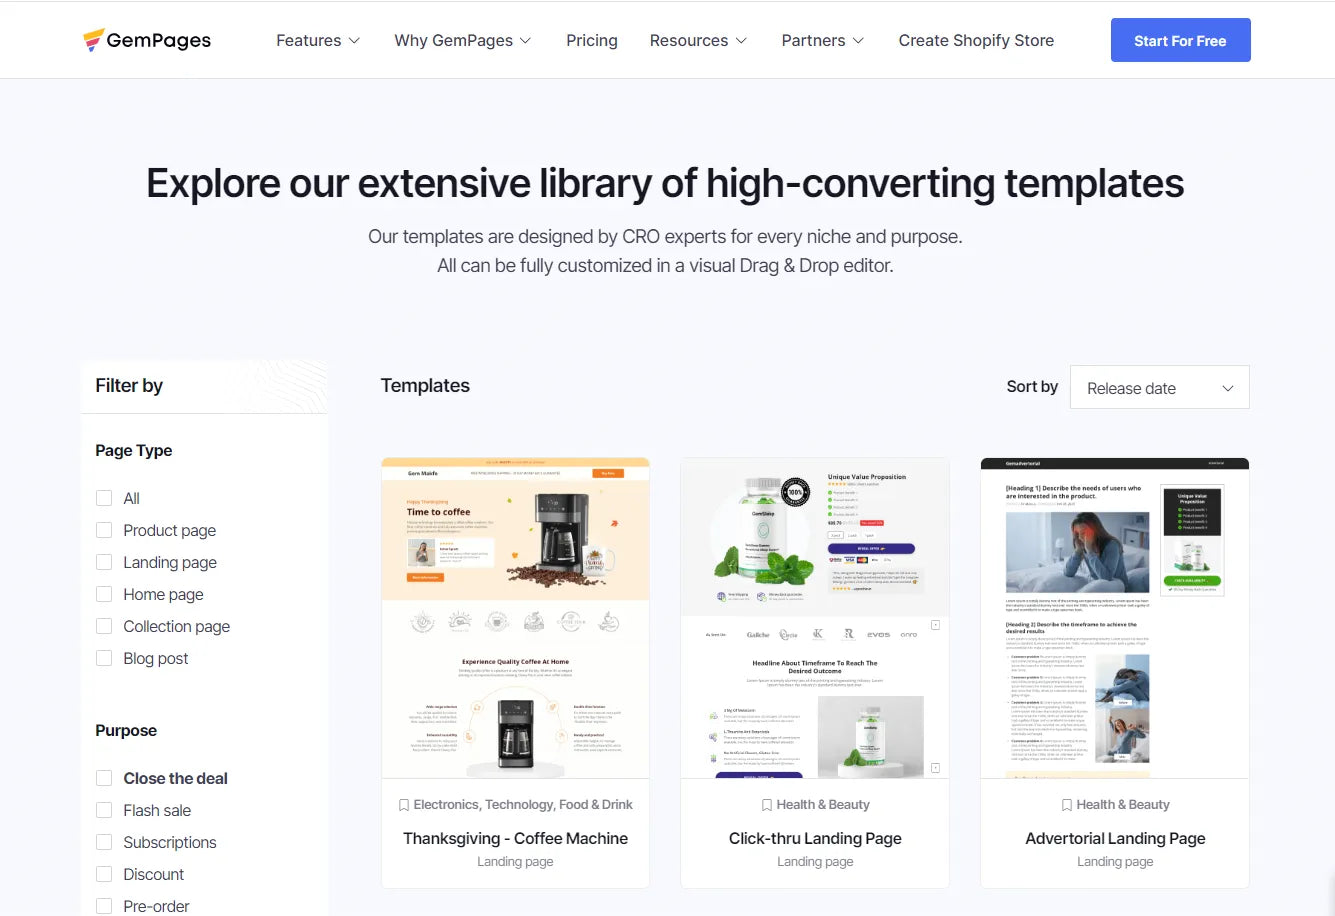 GemPages offers a variety of templates for eCommerce website